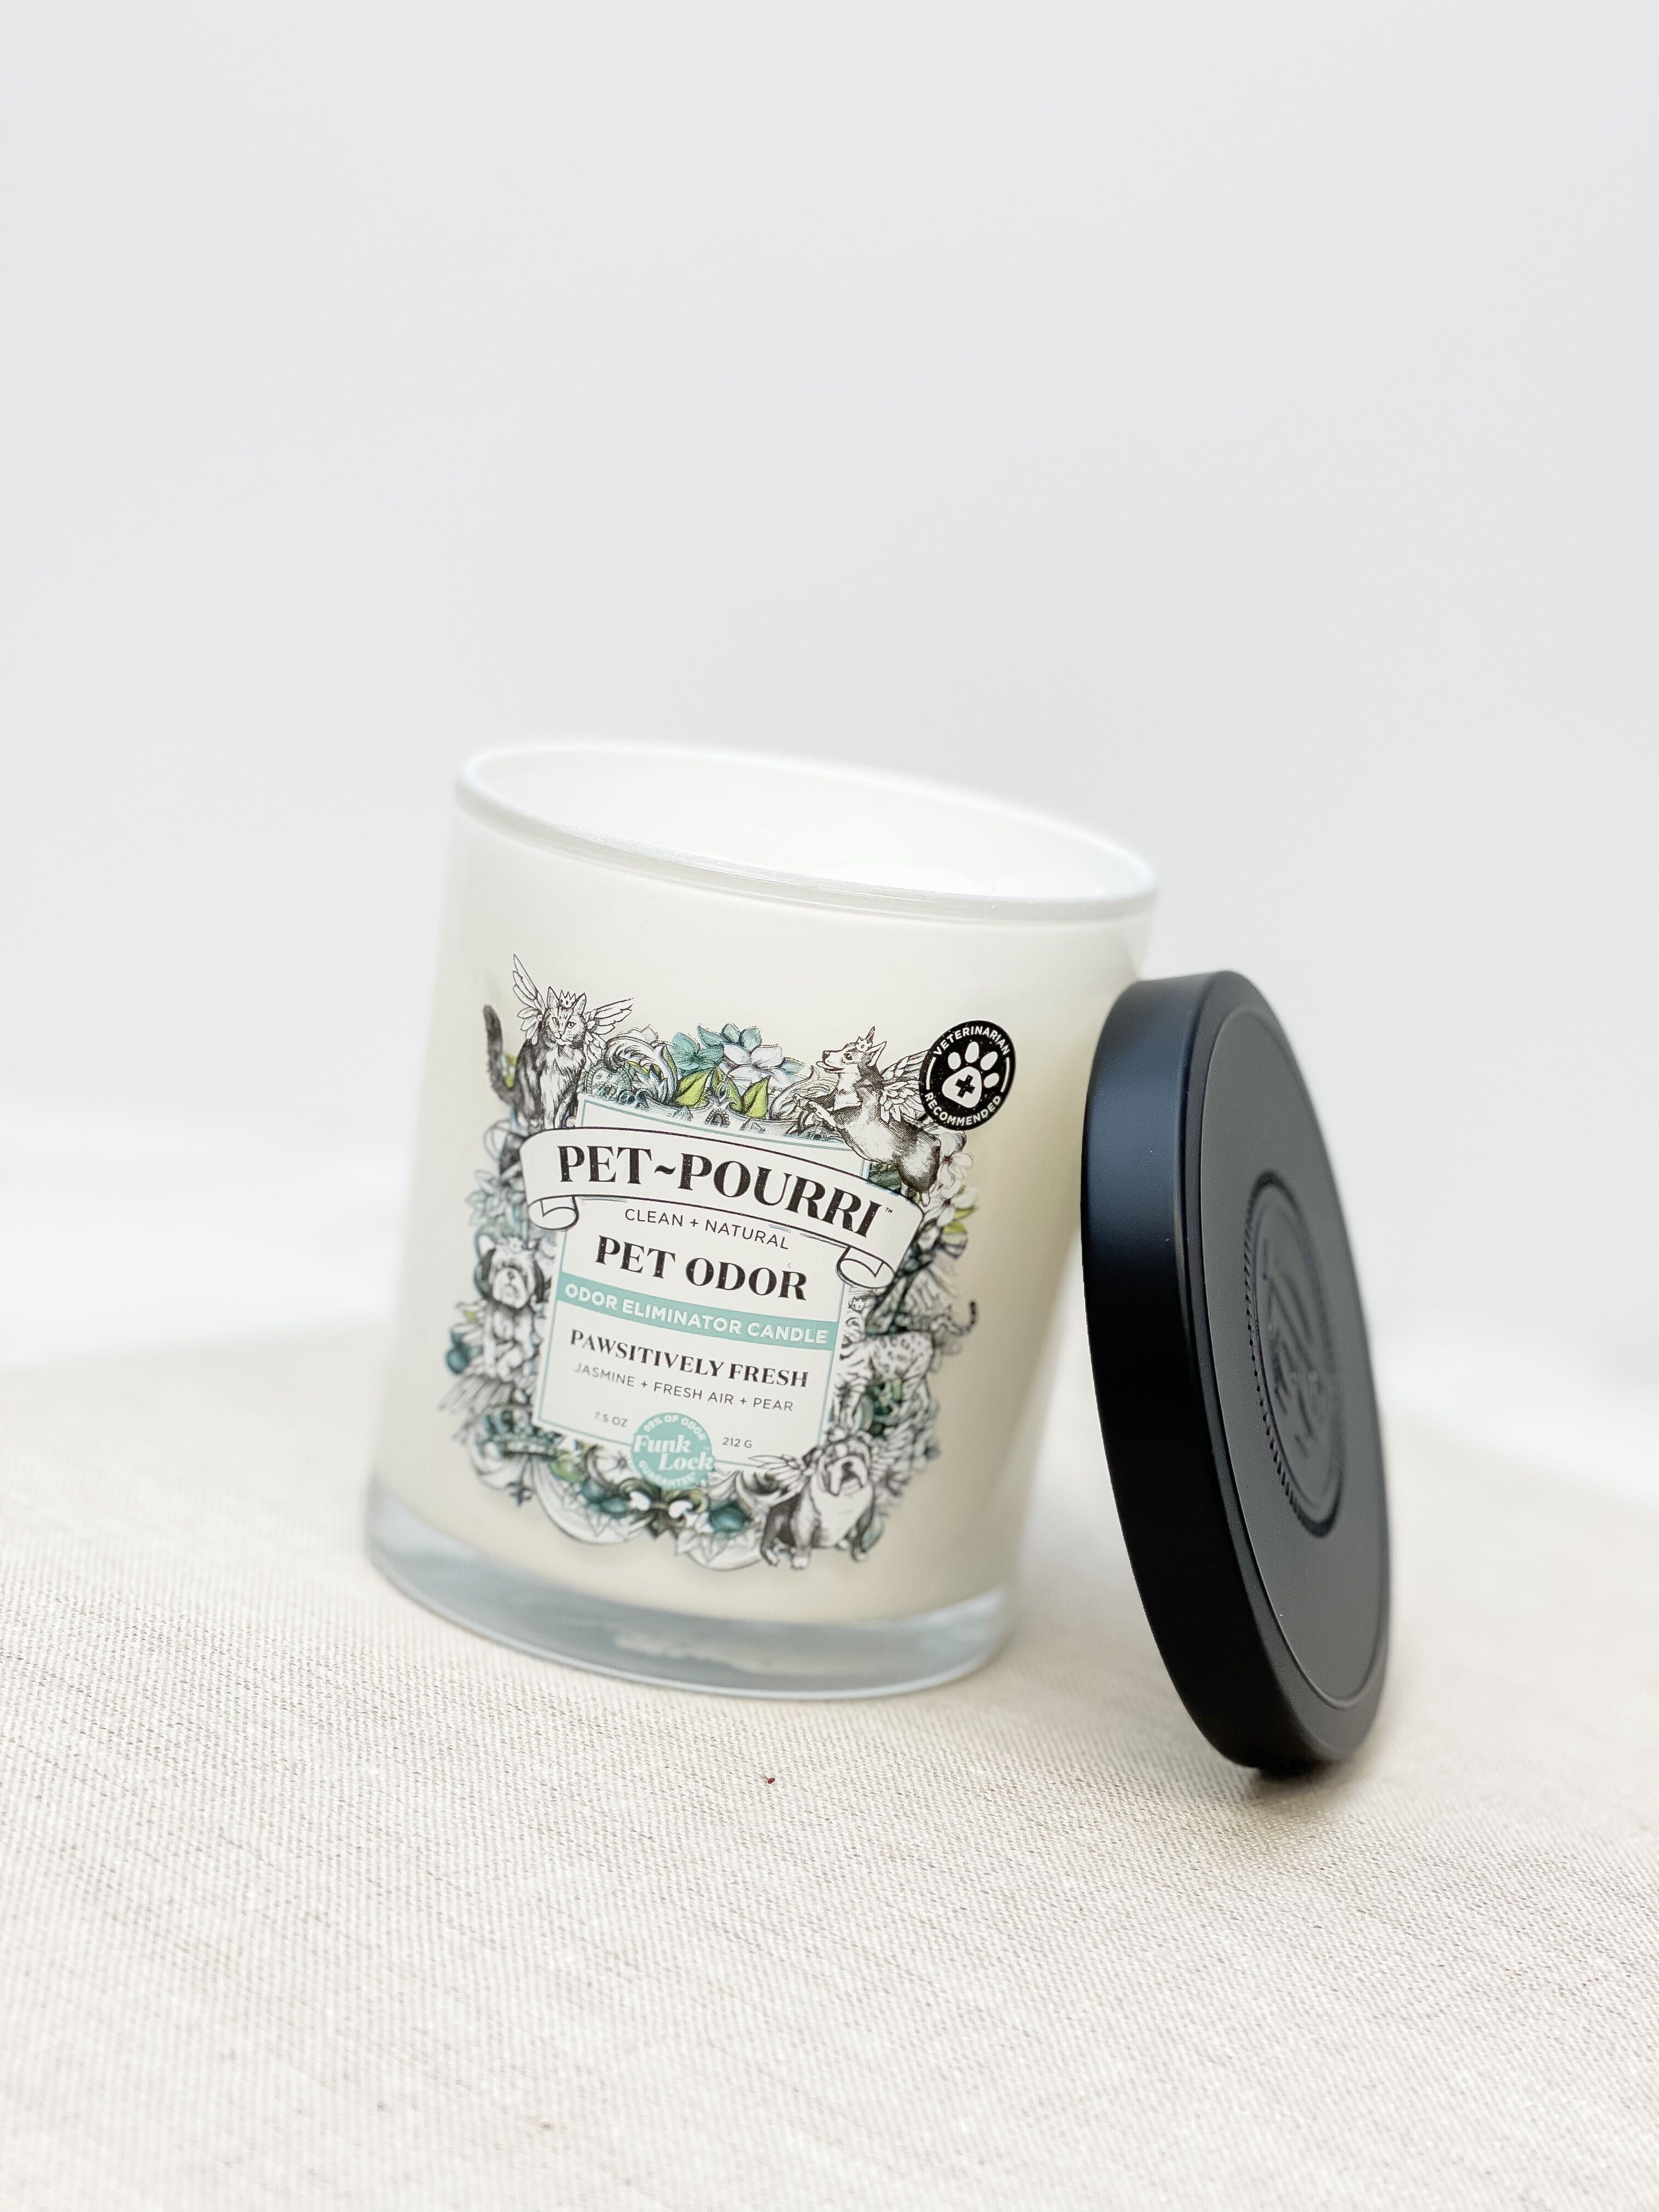 Pawsitively Fresh Pet Odor Eliminator Candle by Poo-Pourri